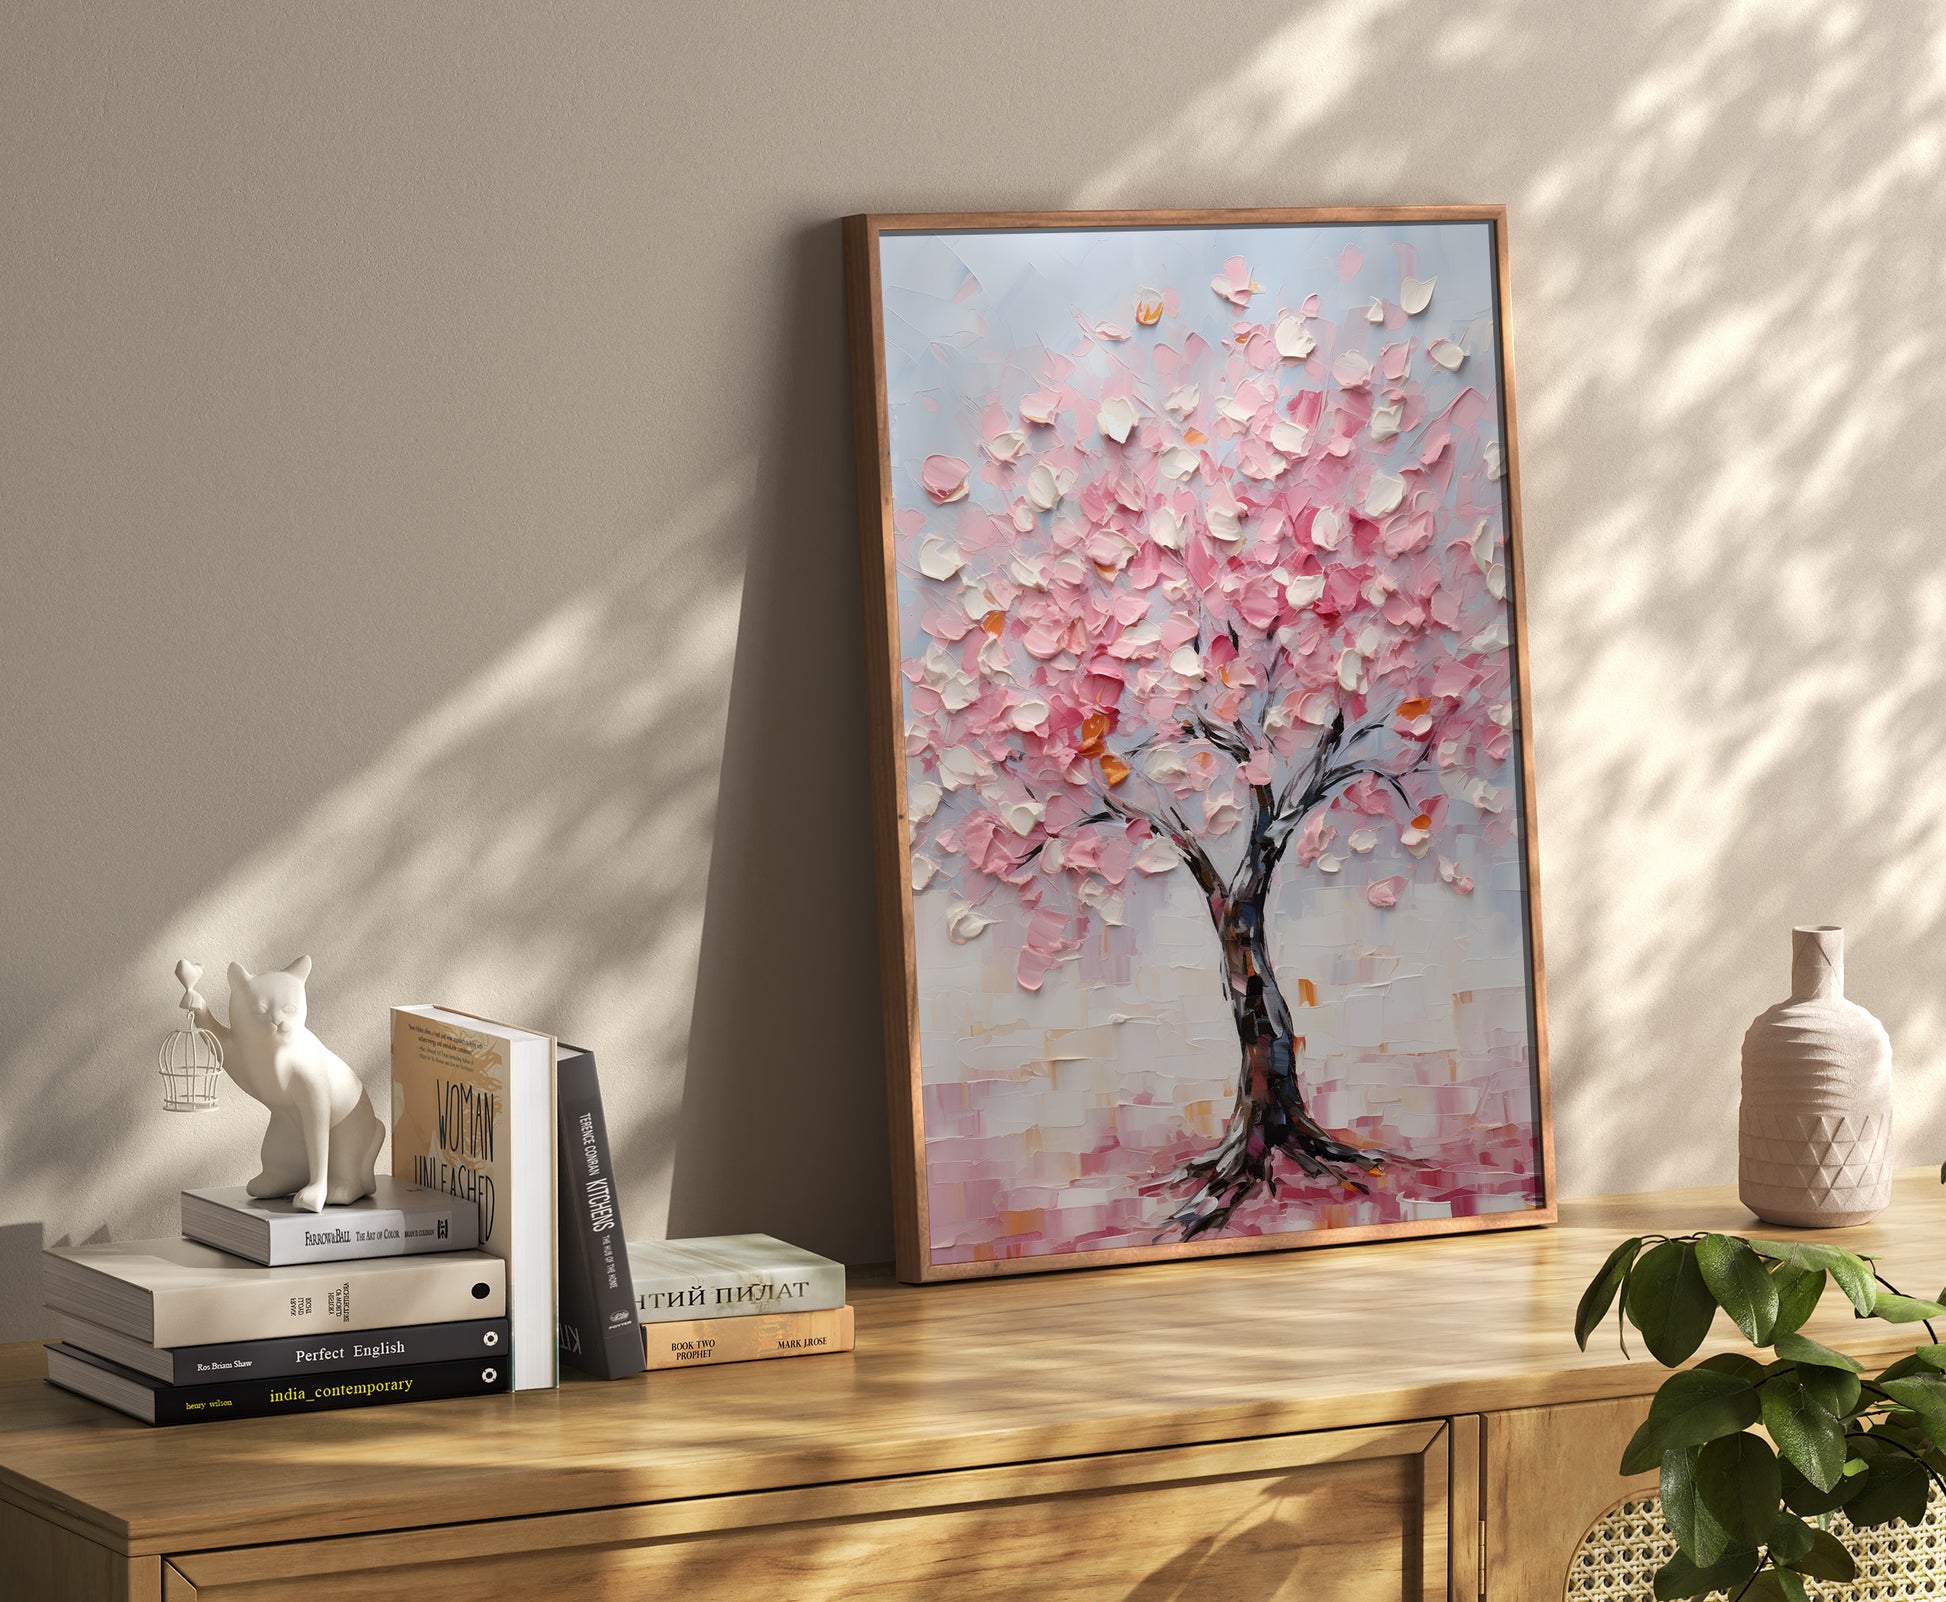 Painting of a cherry blossom tree in a room with books and decorative items.